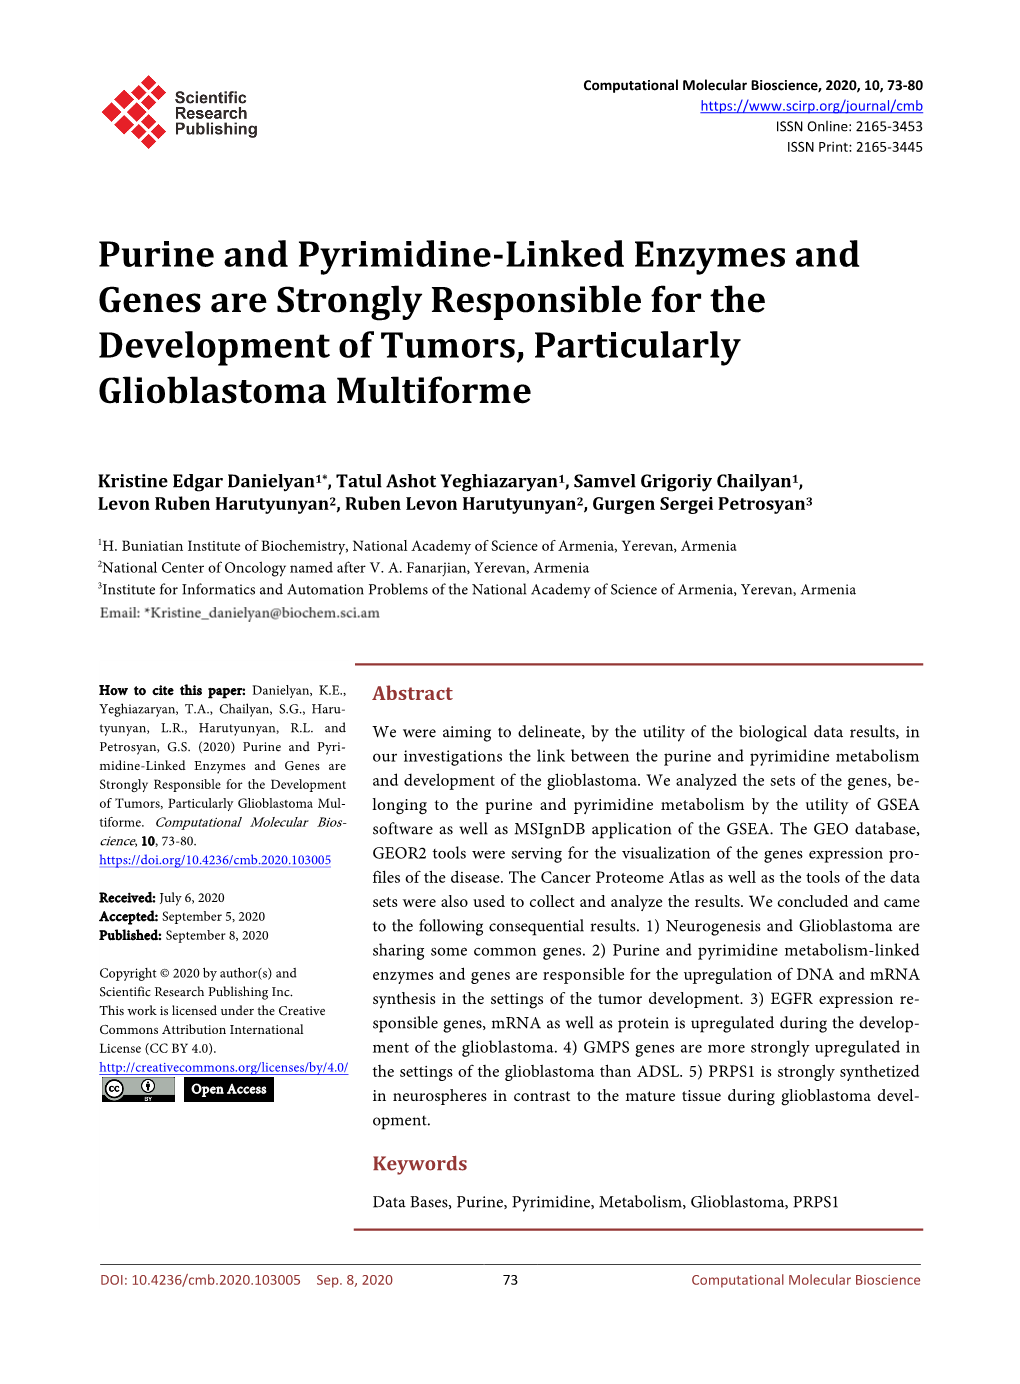 Purine and Pyrimidine-Linked Enzymes and Genes Are Strongly Responsible for the Development of Tumors, Particularly Glioblastoma Multiforme